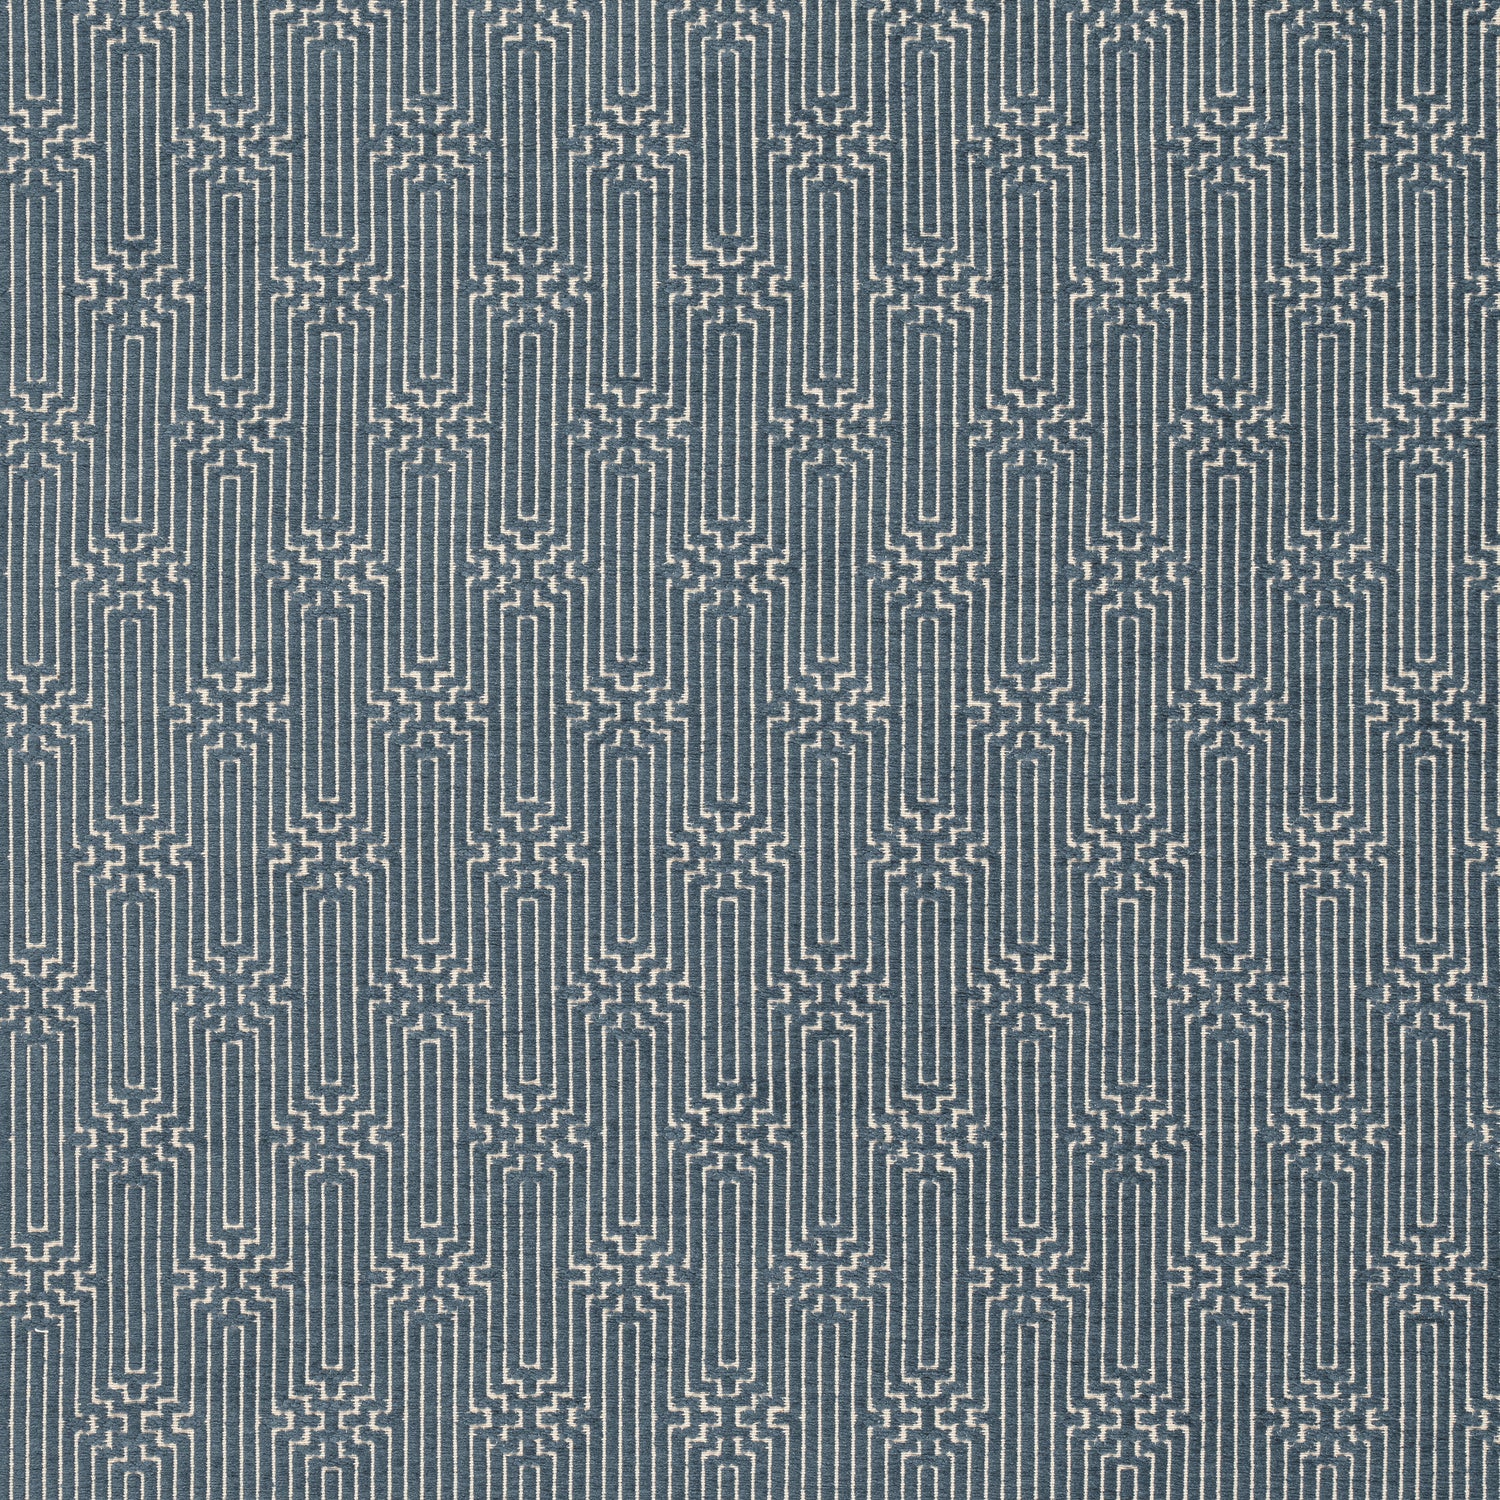 Crete fabric in heron color - pattern number W74213 - by Thibaut in the Passage collection